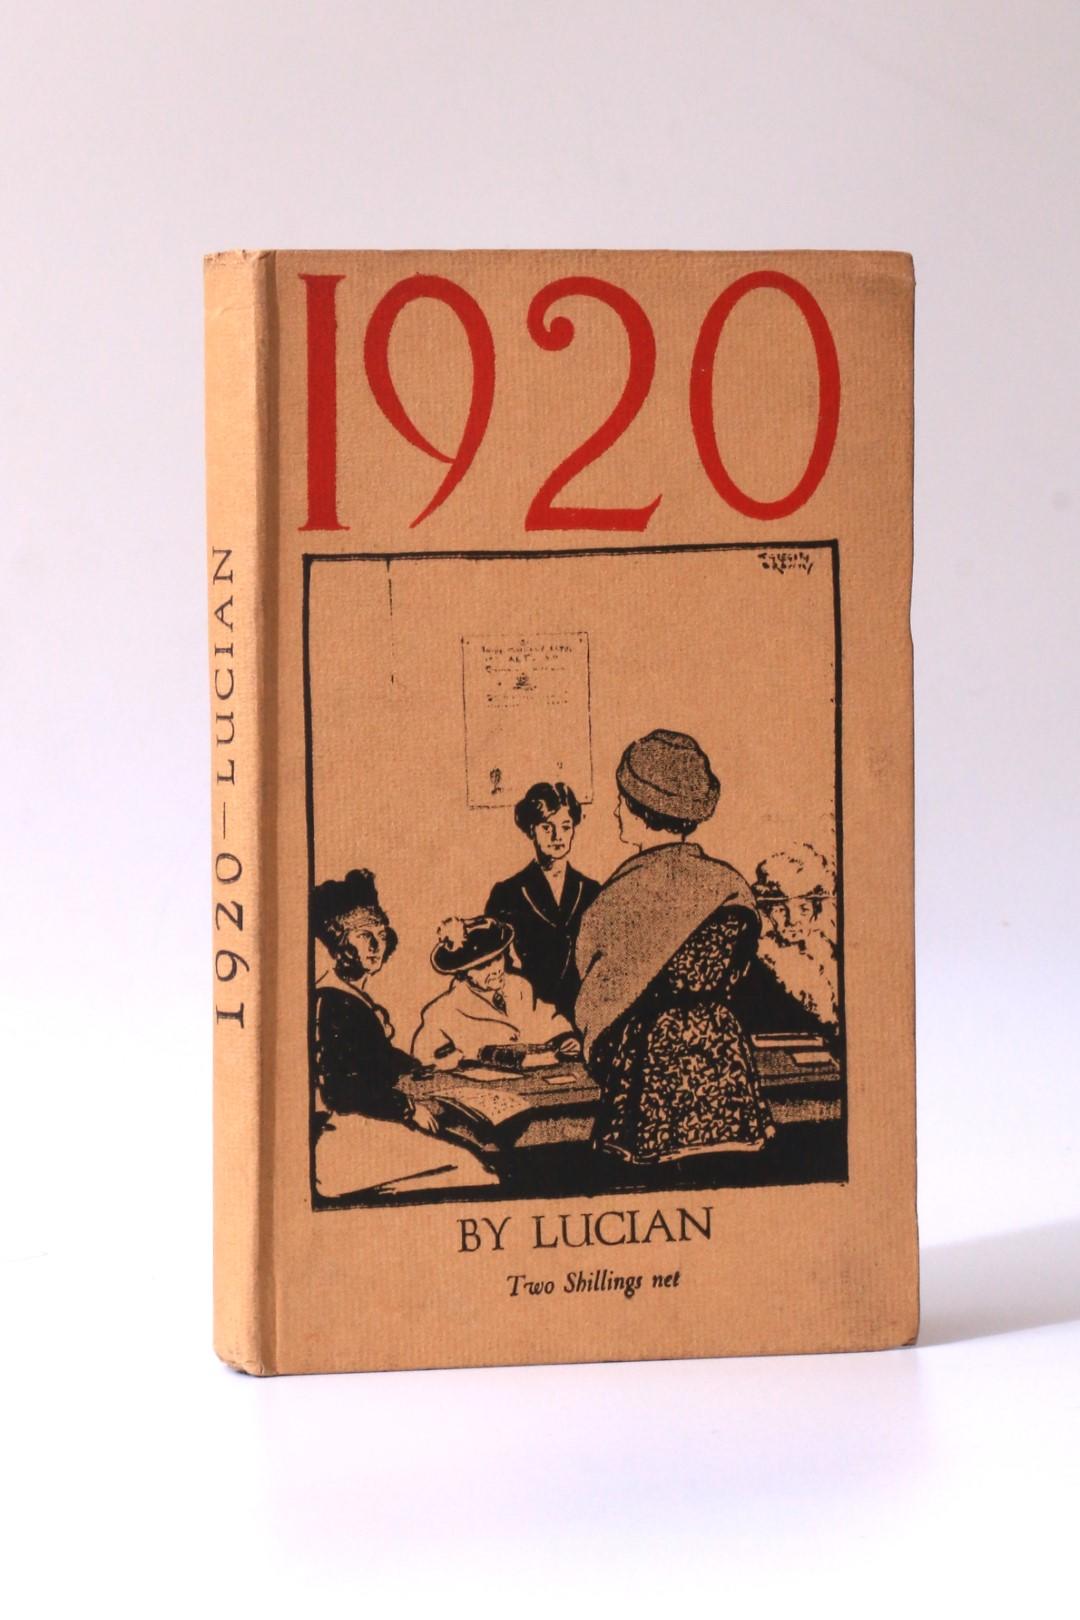 Lucian [Anonymous] - 1920: Dips into the Near Future - Headley Bros, n.d. [1917], First Edition.